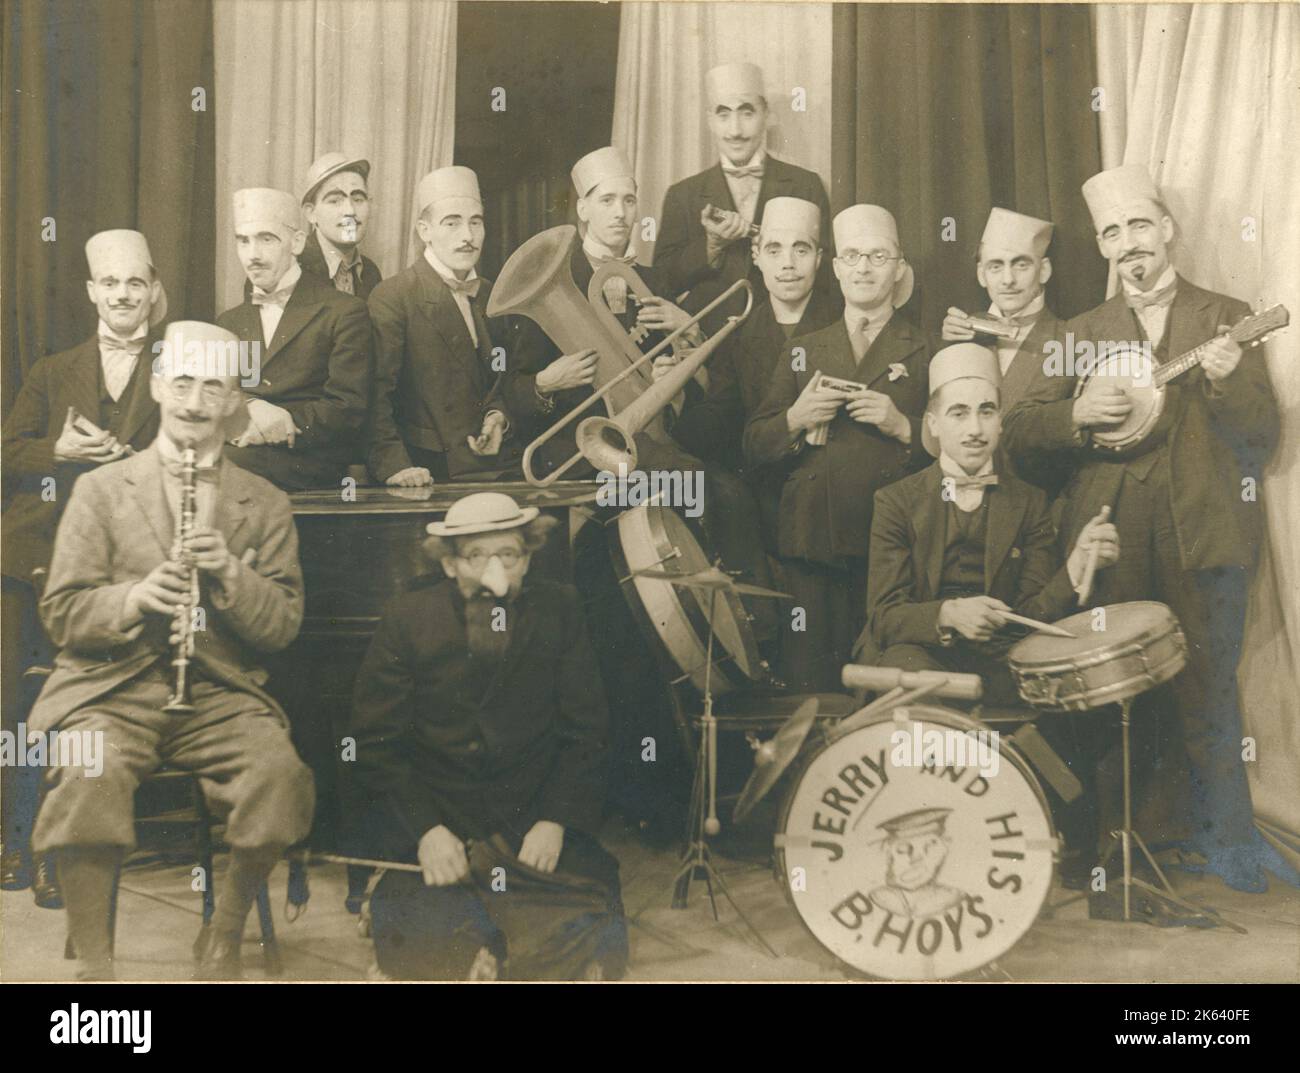 A band, most of whom are wearing disguise of heavy eyebrows and moustaches, presumably a gimmick during a performance, or just for the hell of it?! Somebody appears to be holding a cardboard tuba, and many of them are holding harmonicas so perhaps this is a comedy amateur performance? B'hoys was a slang term for boys, particularly used during the First World War. Stock Photo